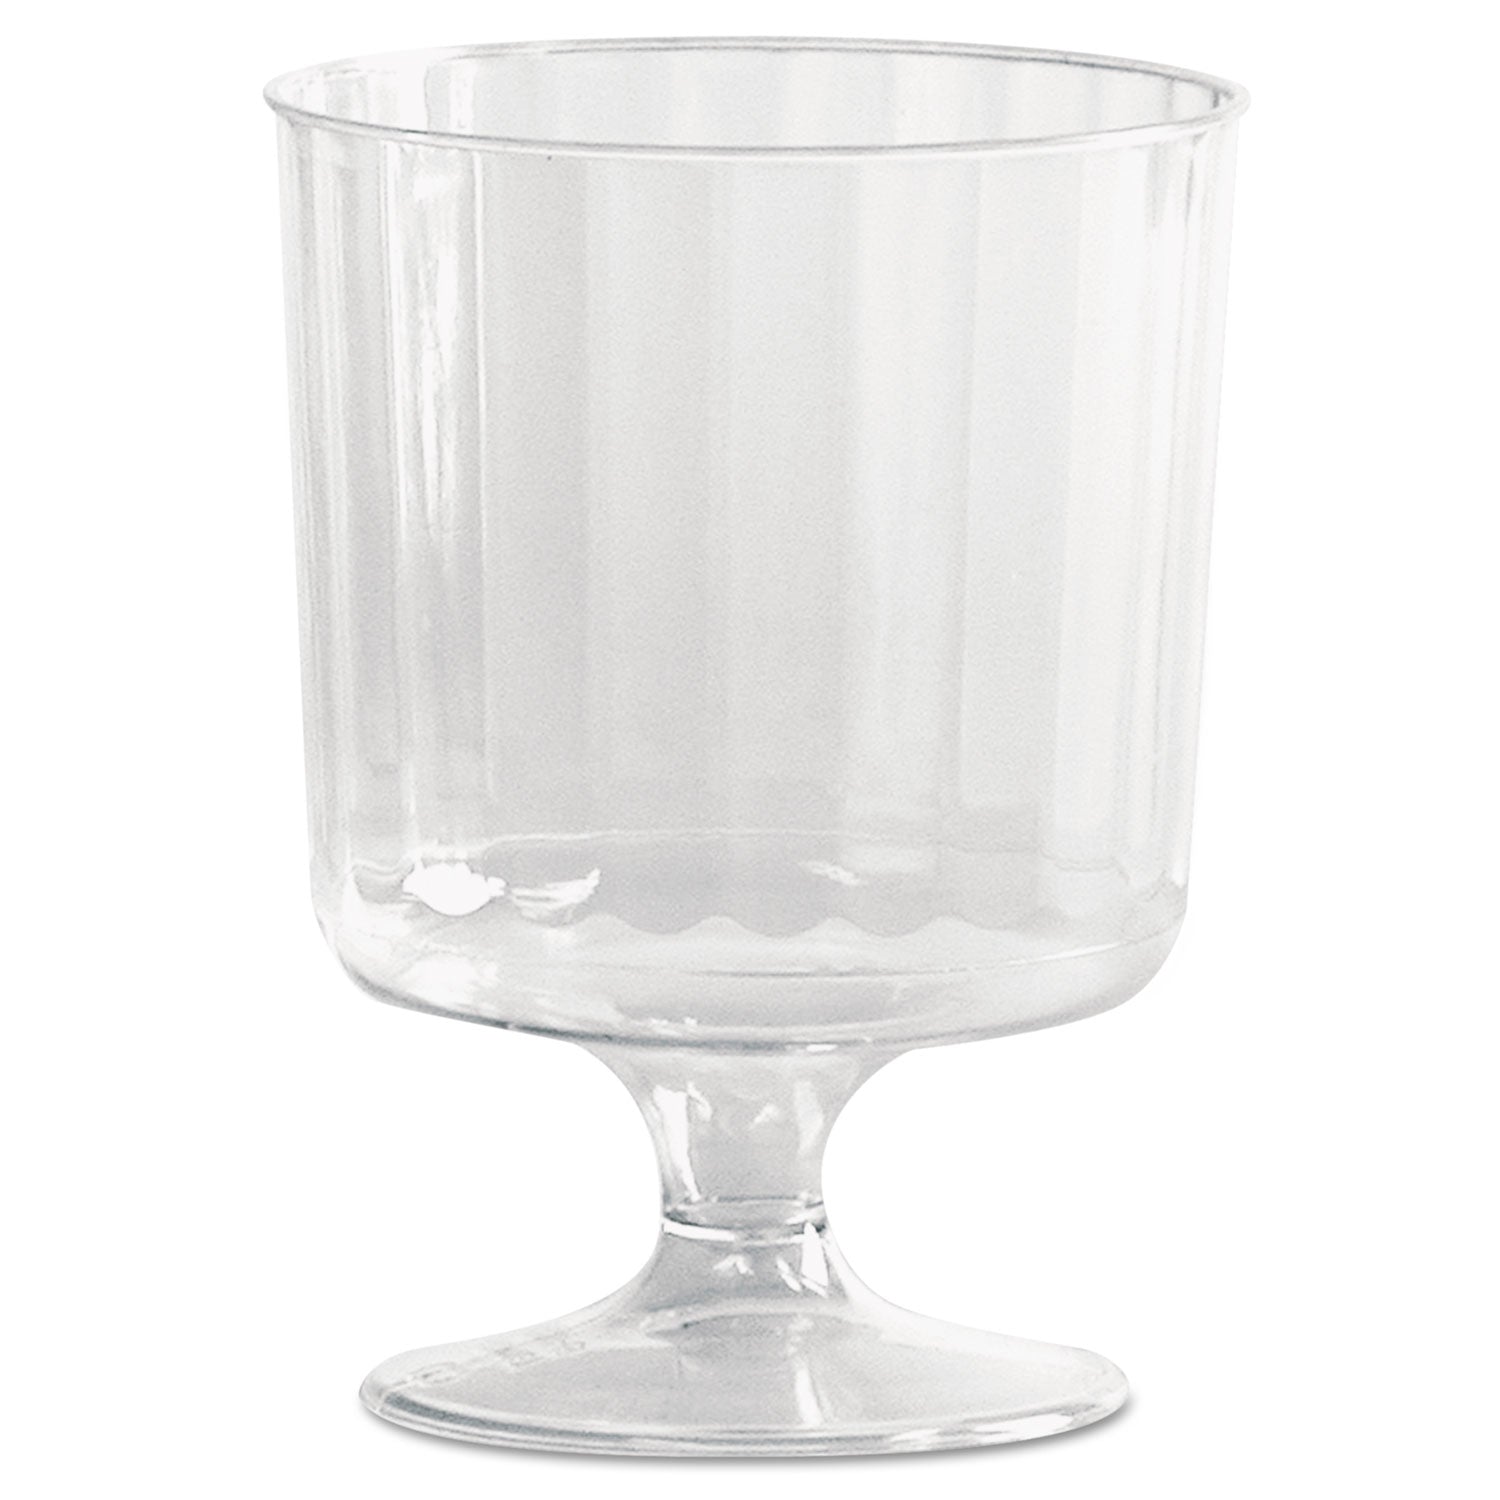 classic-crystal-plastic-wine-glasses-on-pedestals-5-oz-clear-fluted-10-pack-24-packs-carton_wnaccw5240 - 1